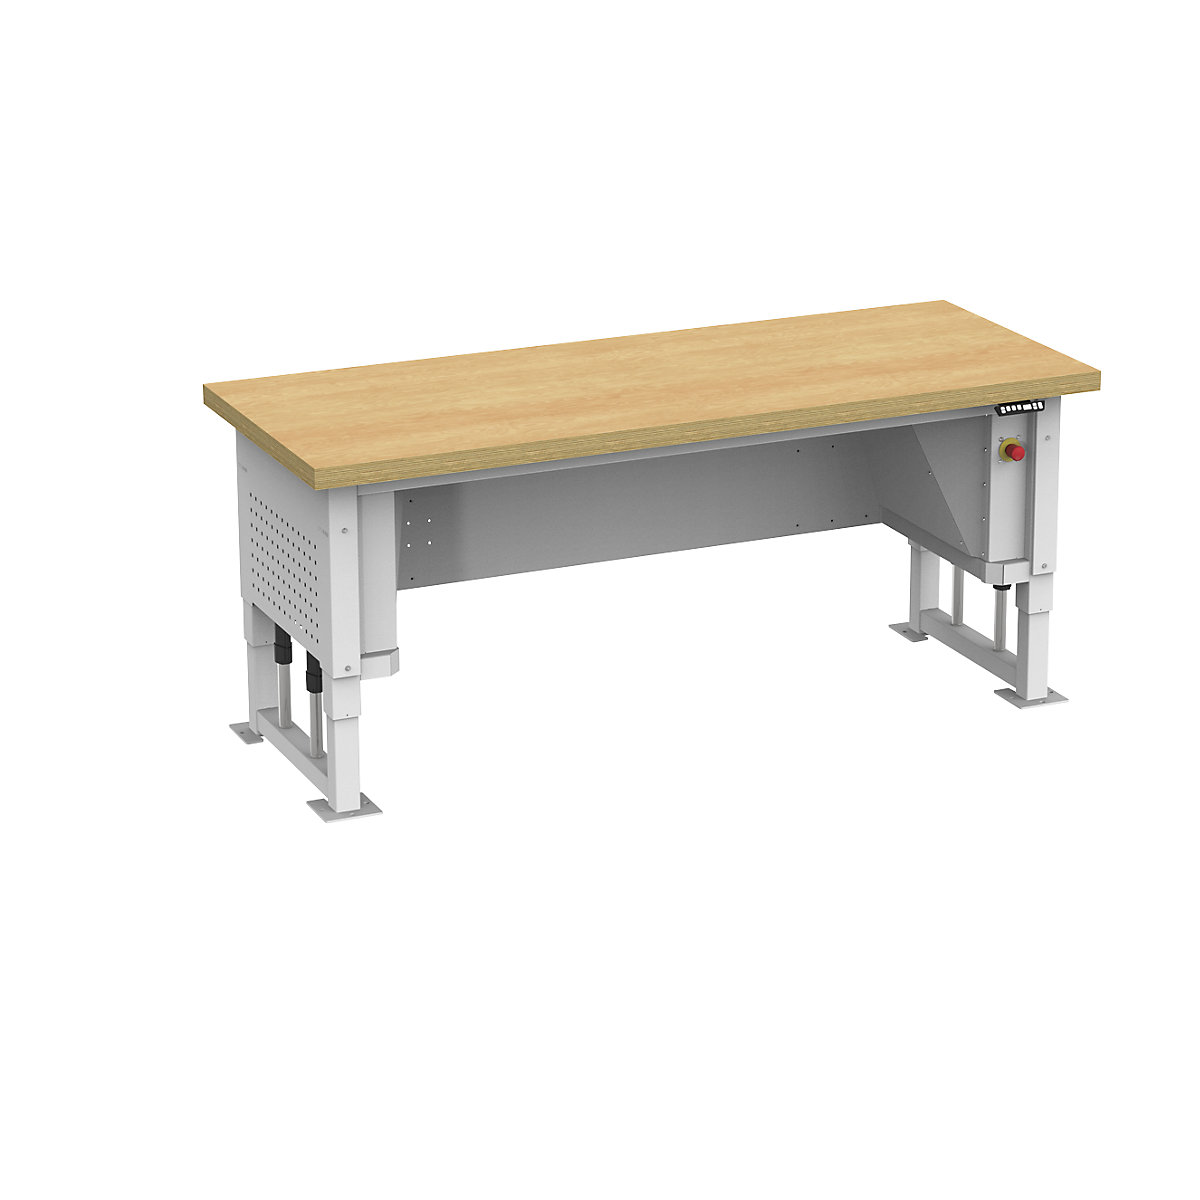 Heavy duty table, electrically height adjustable, worktop width 2030 mm, max. surface load 1000 kg, light grey RAL 7035-1